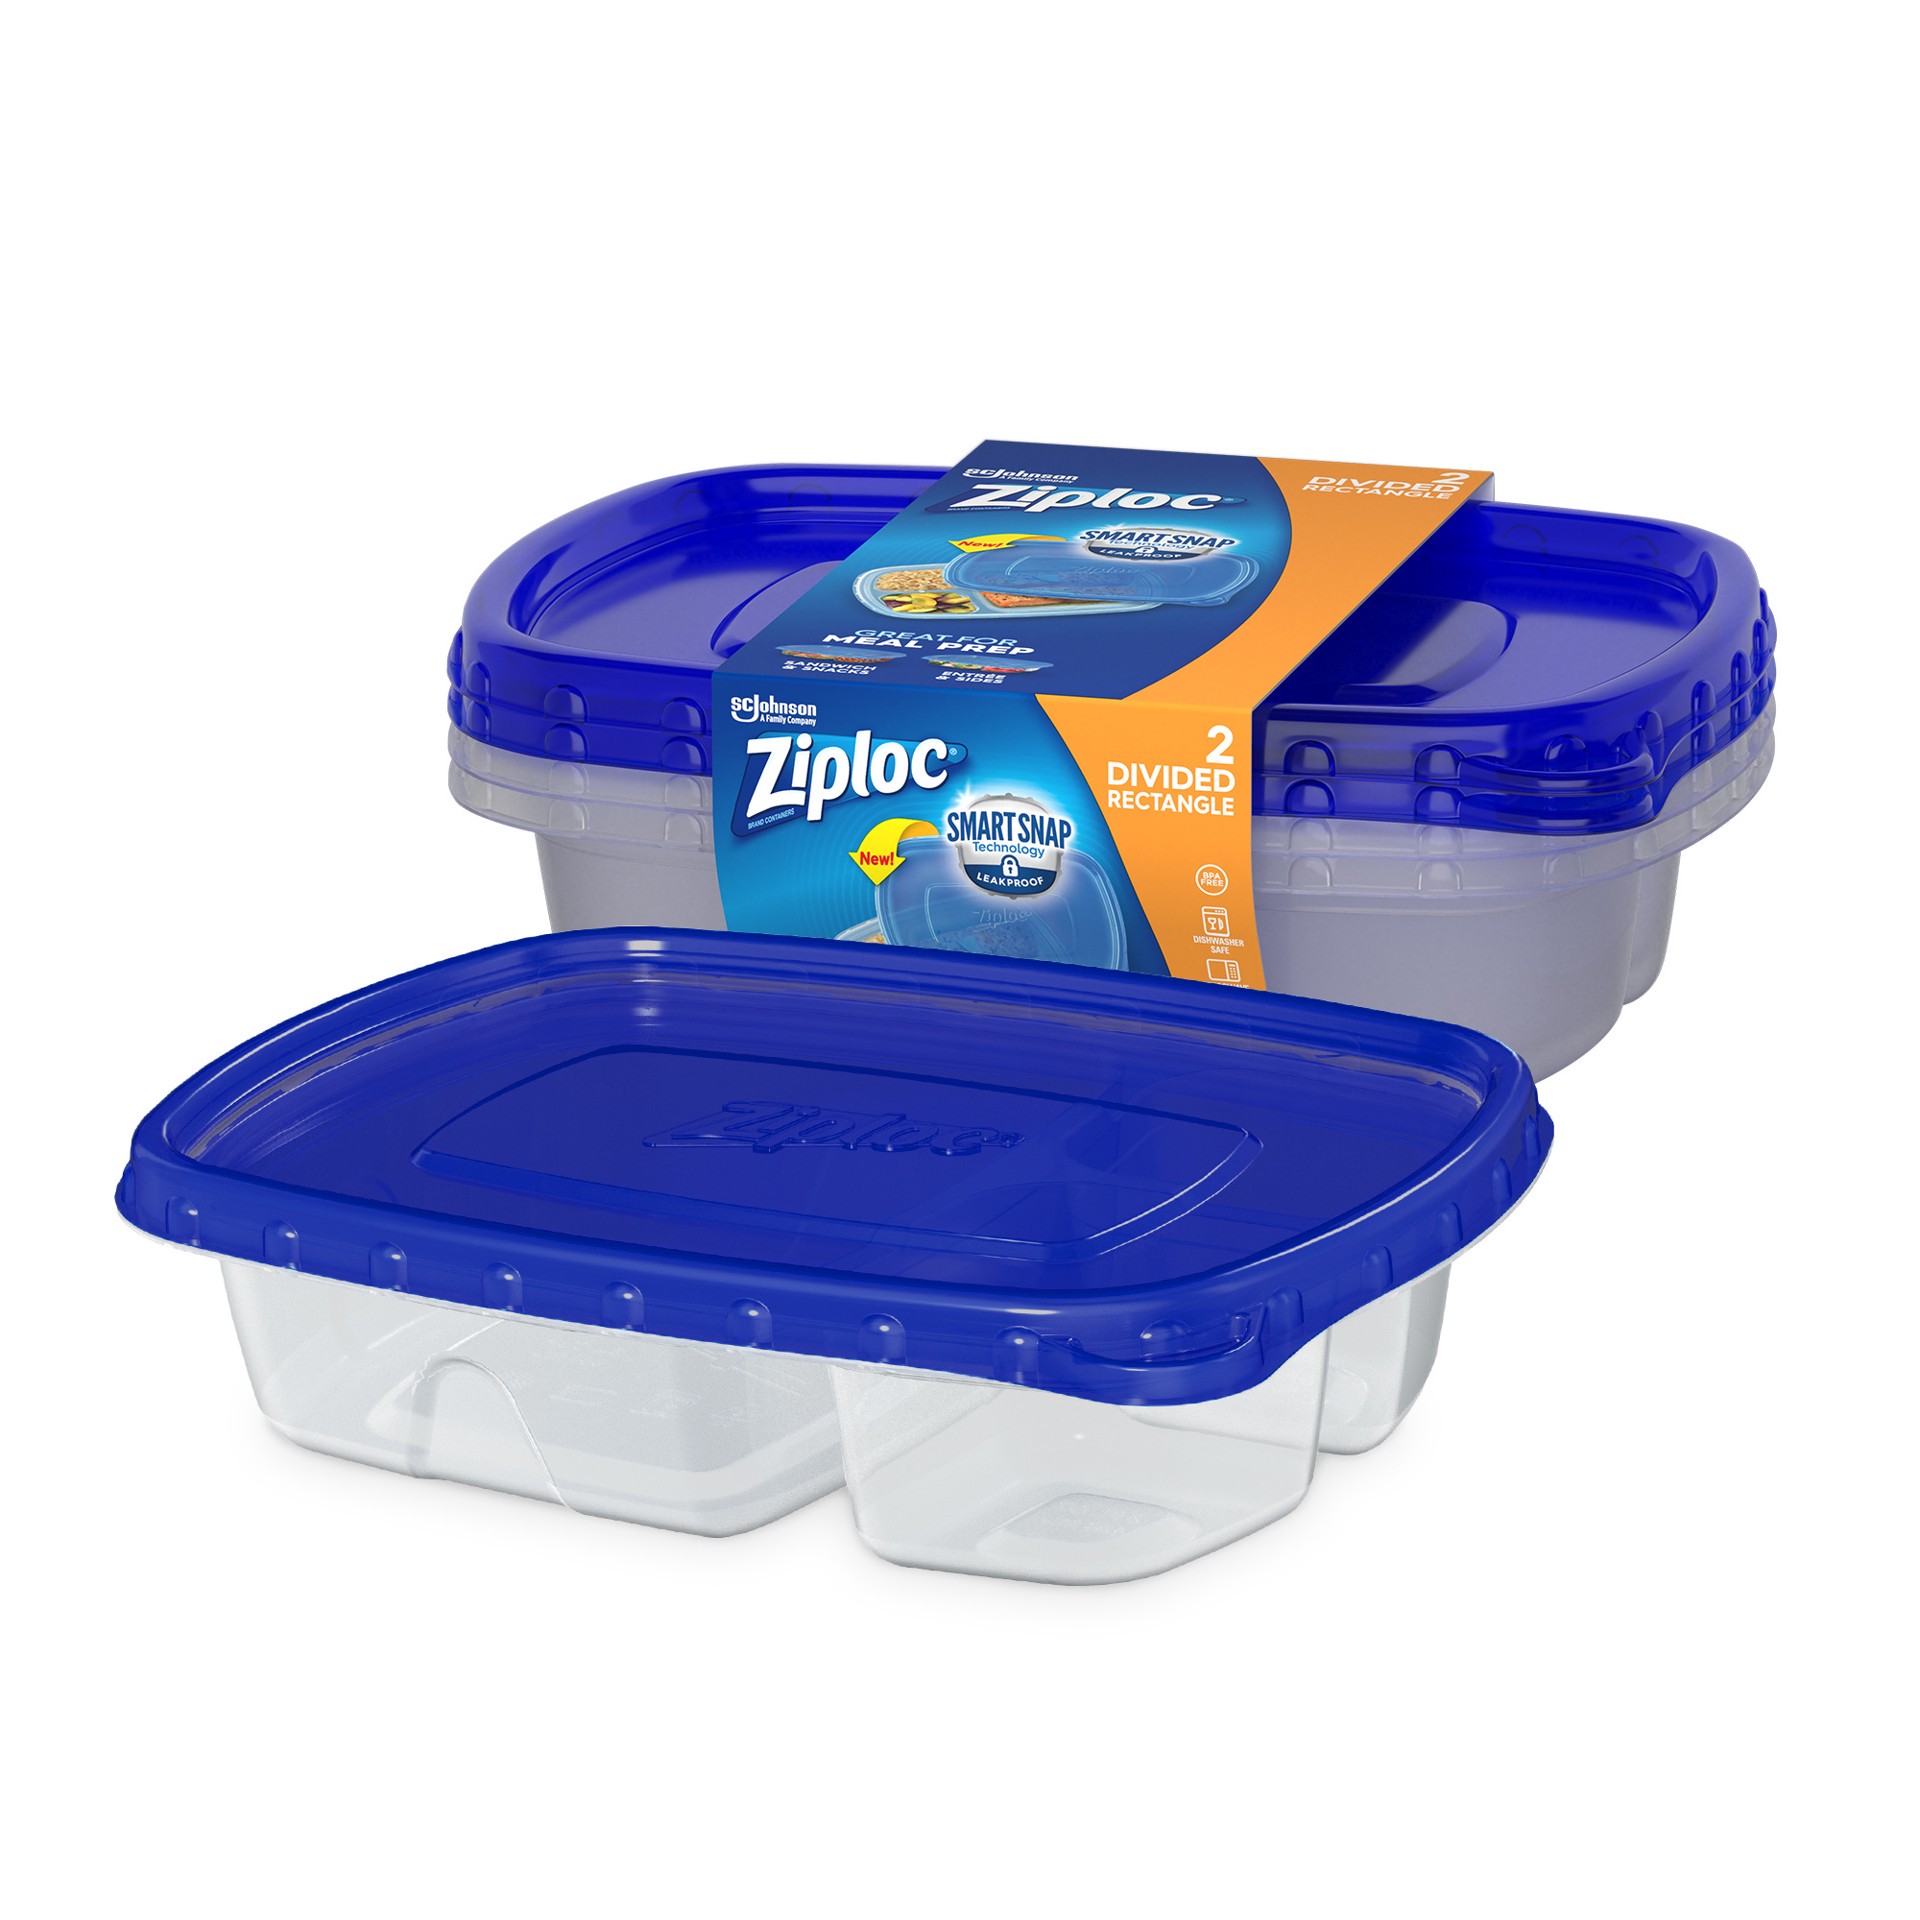 slide 4 of 5, Ziploc Brand, Food Storage Containers with Lids, Smart Snap Technology, Divided Rectangle, 2 ct, 2 ct